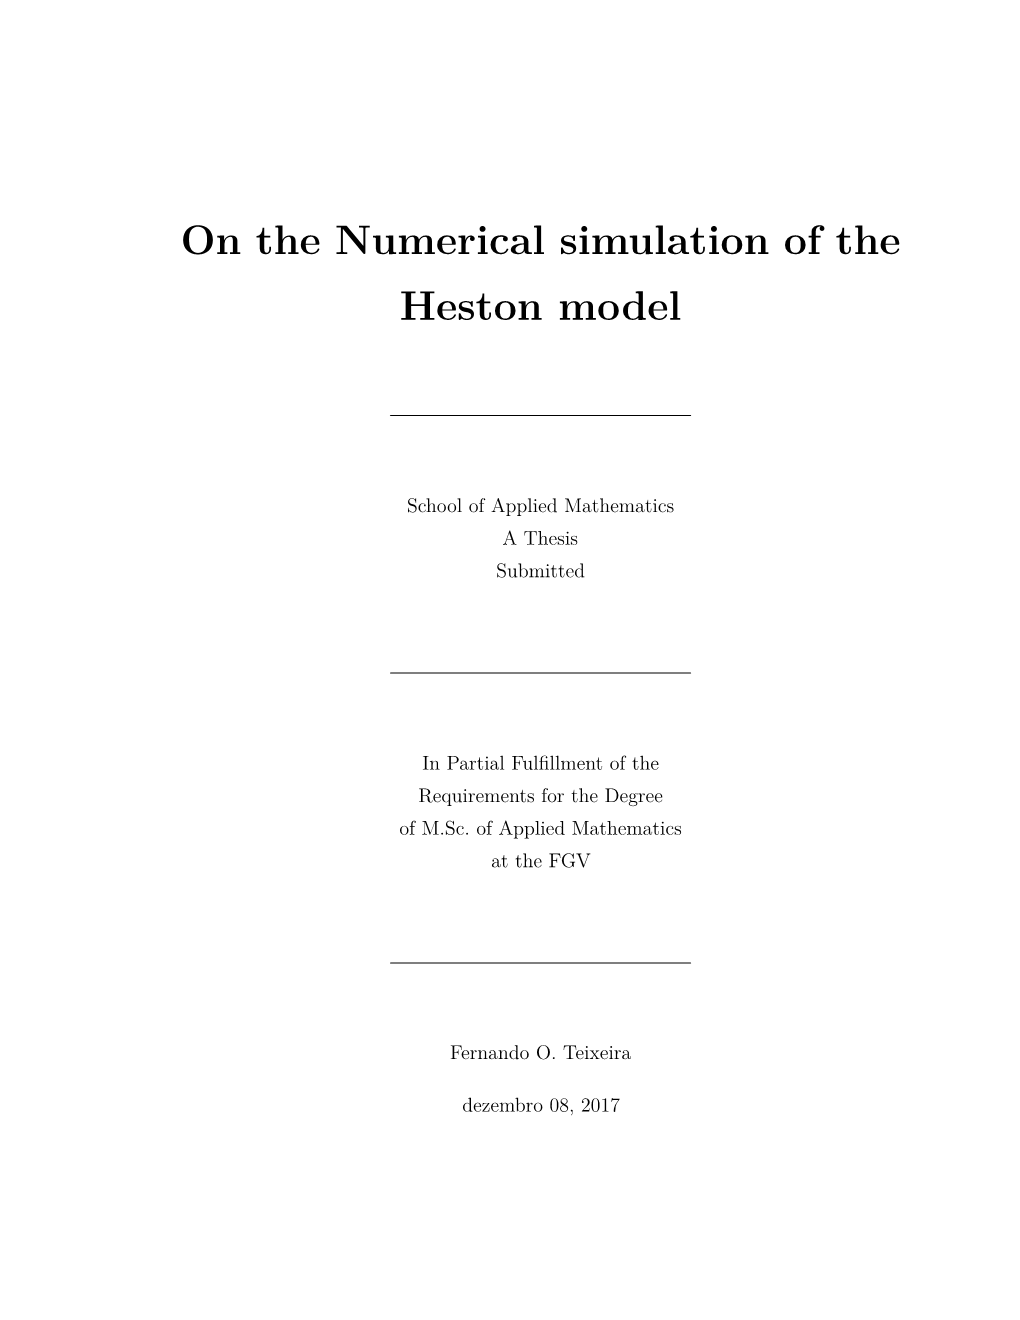 On the Numerical Simulation of the Heston Model